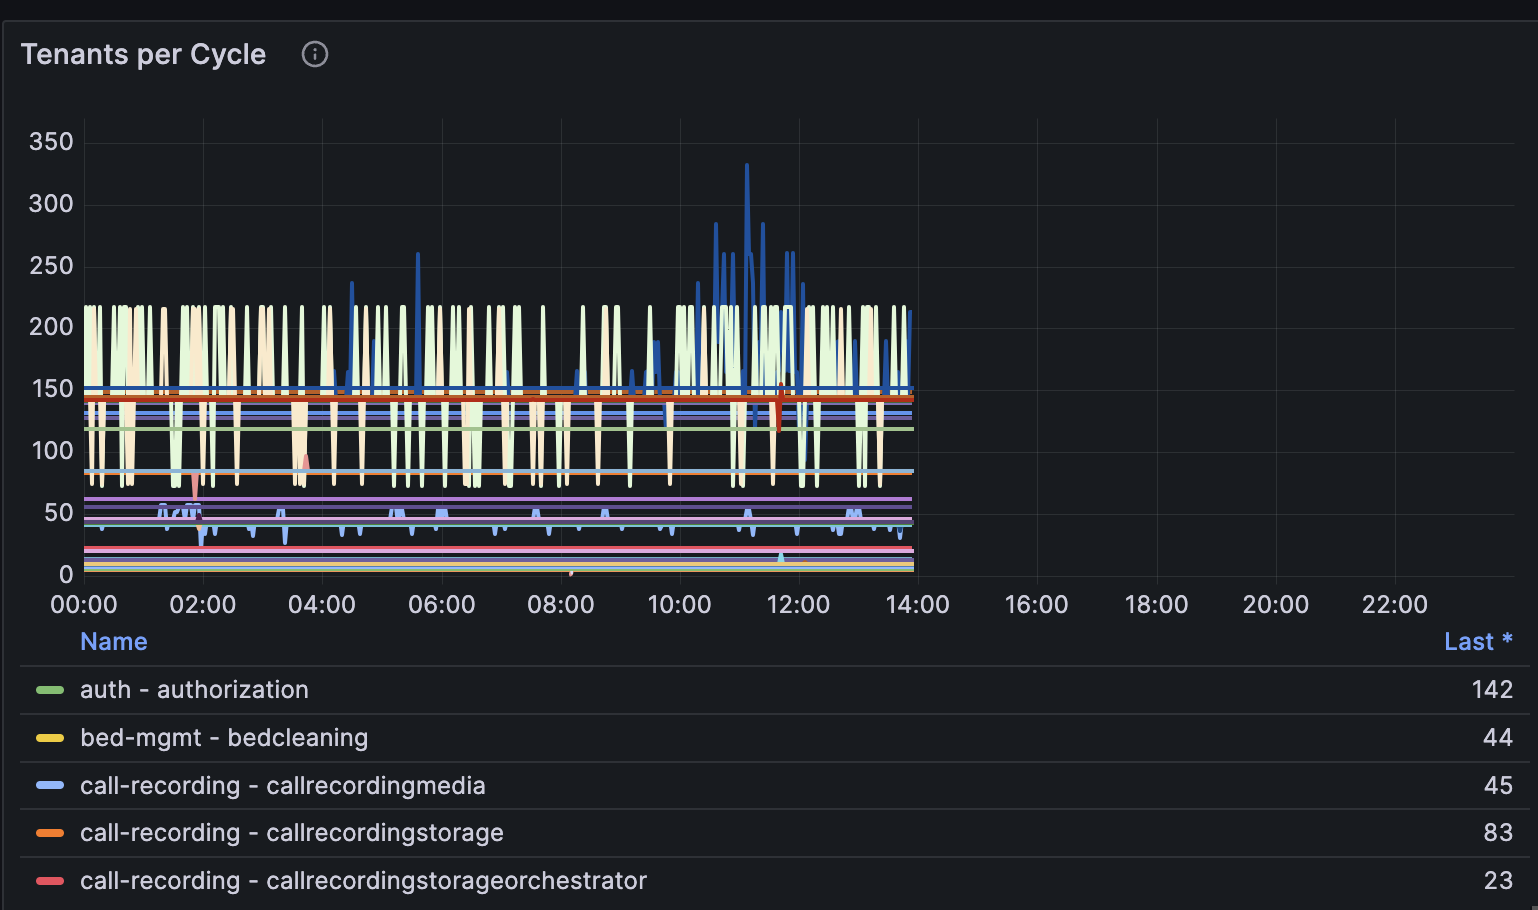 A Grafana dashboard displays the number of tenants being processed in cycle.